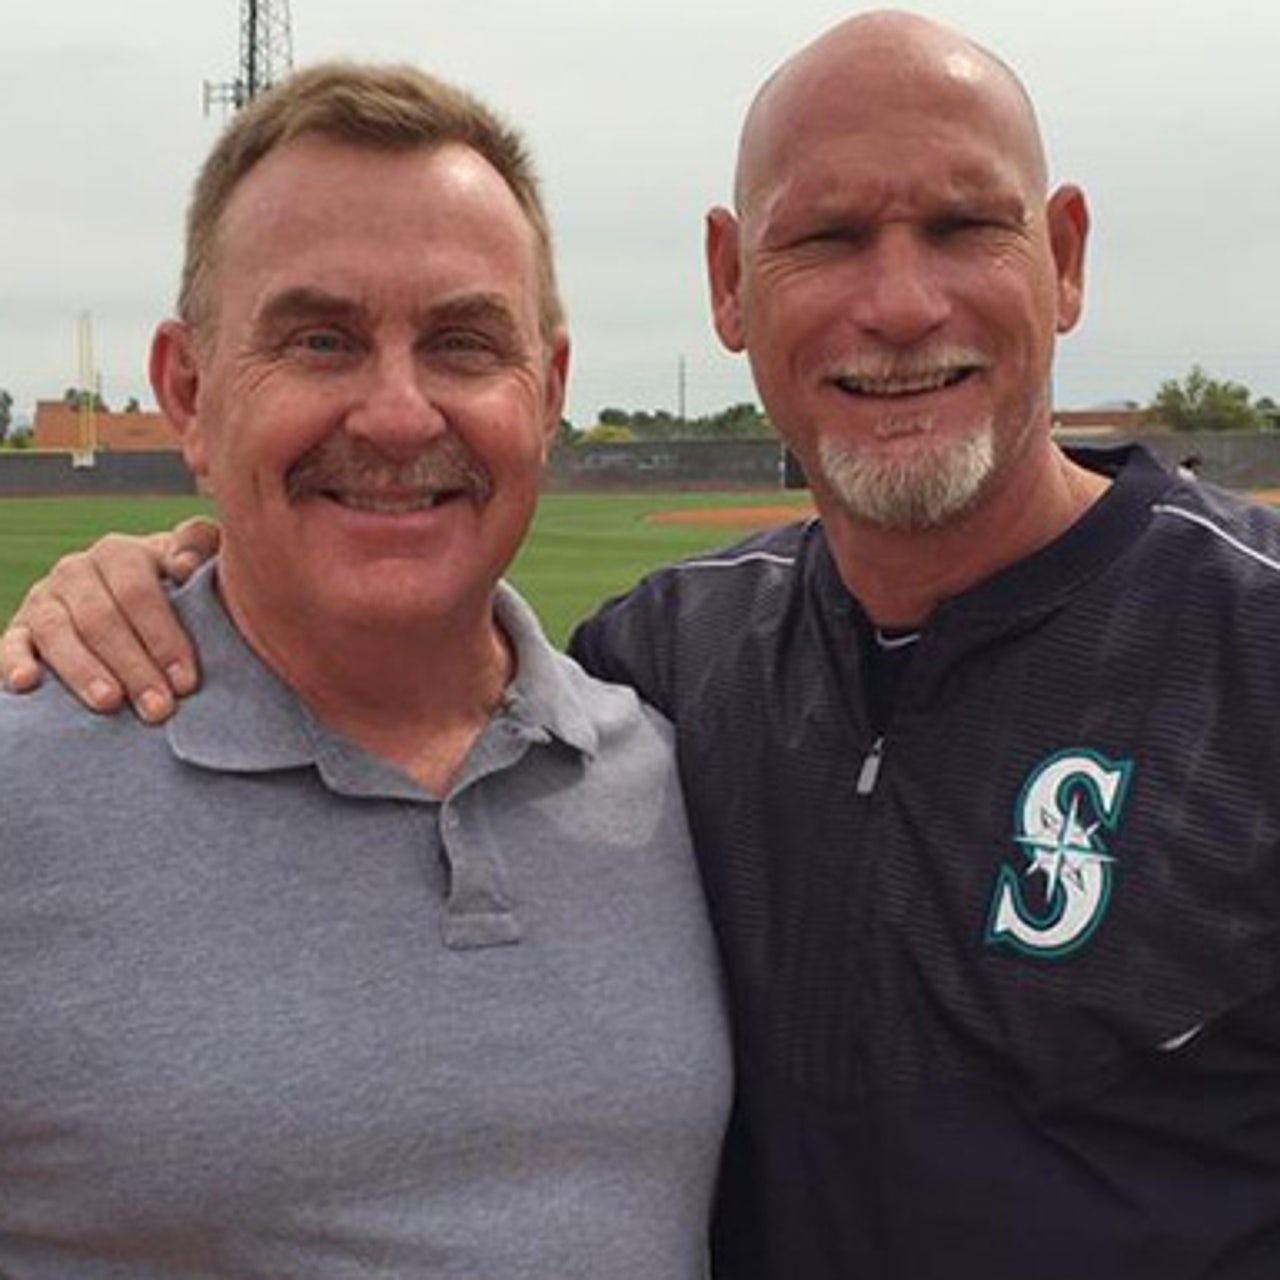 Jay Buhner, Ken Phelps reunite, talk about memorable role in